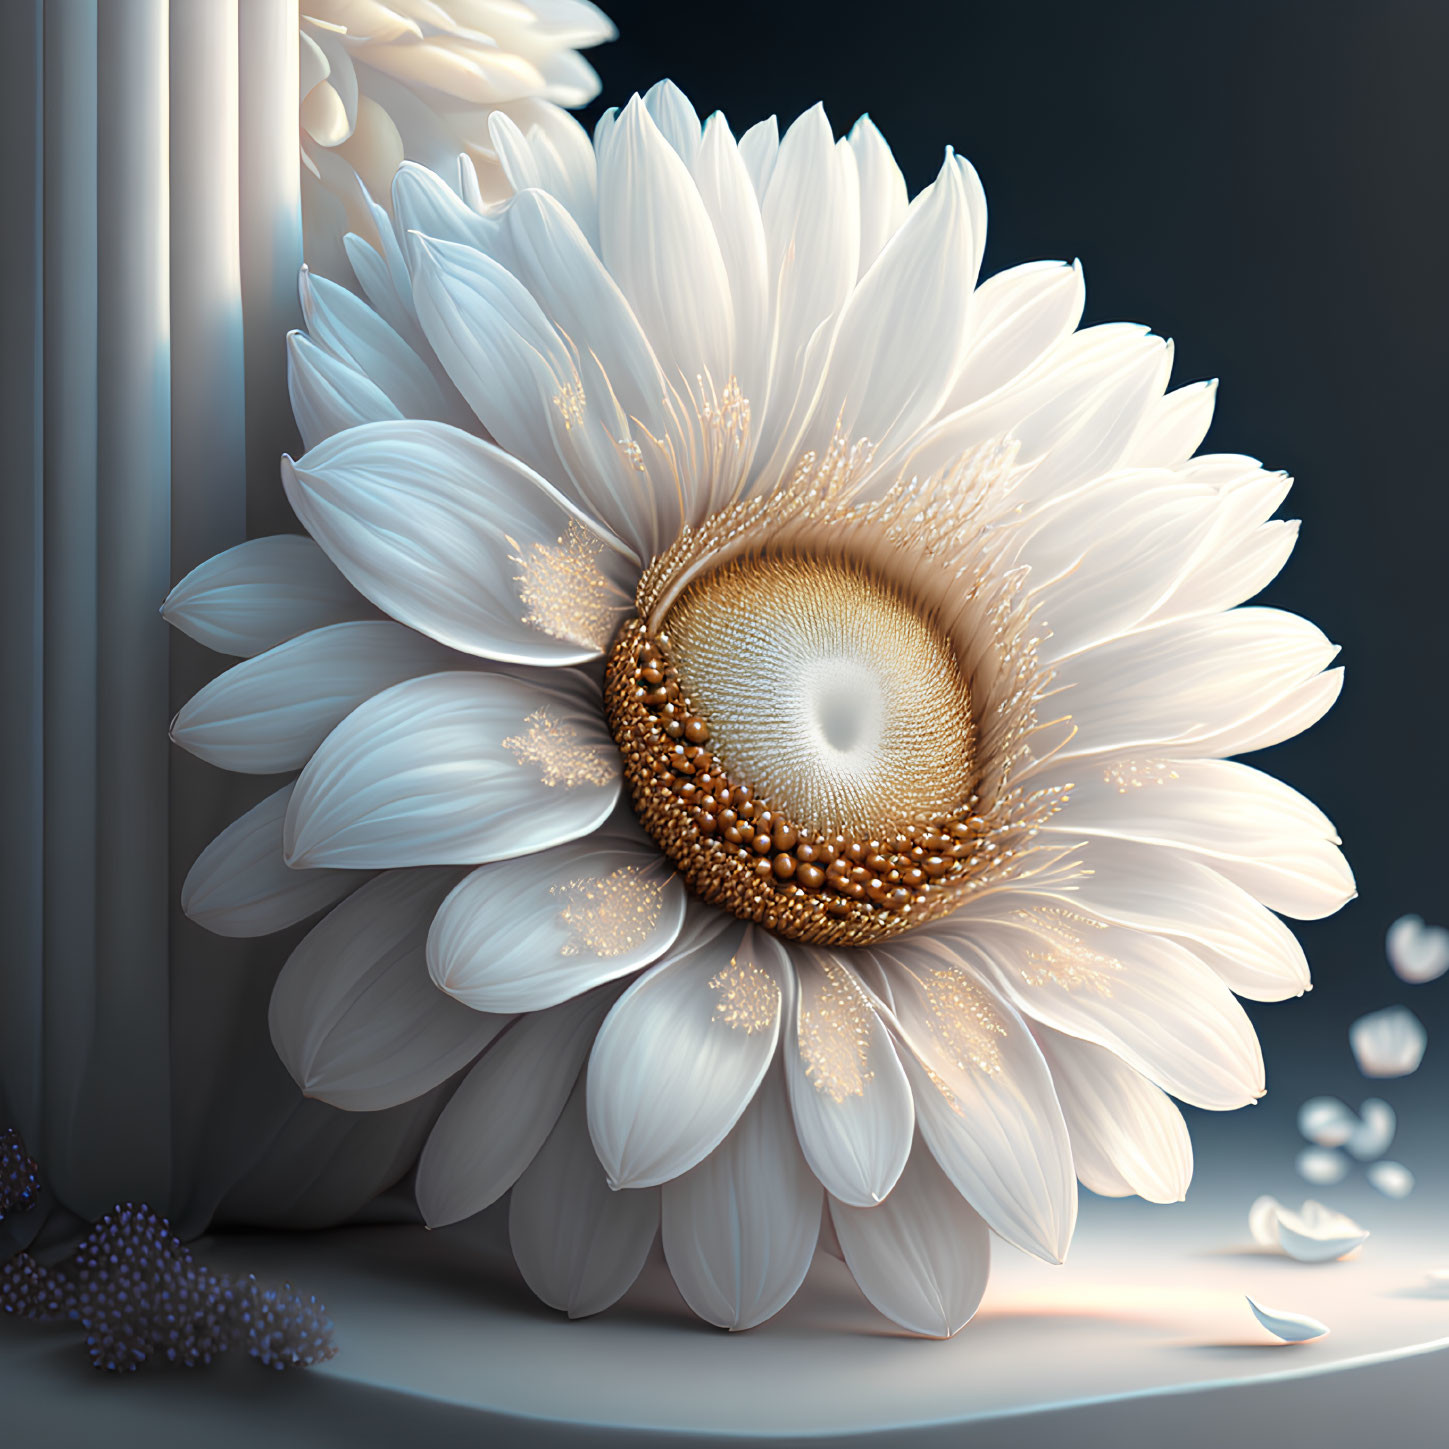 Detailed digital illustration of white daisy with golden center on soft grey background